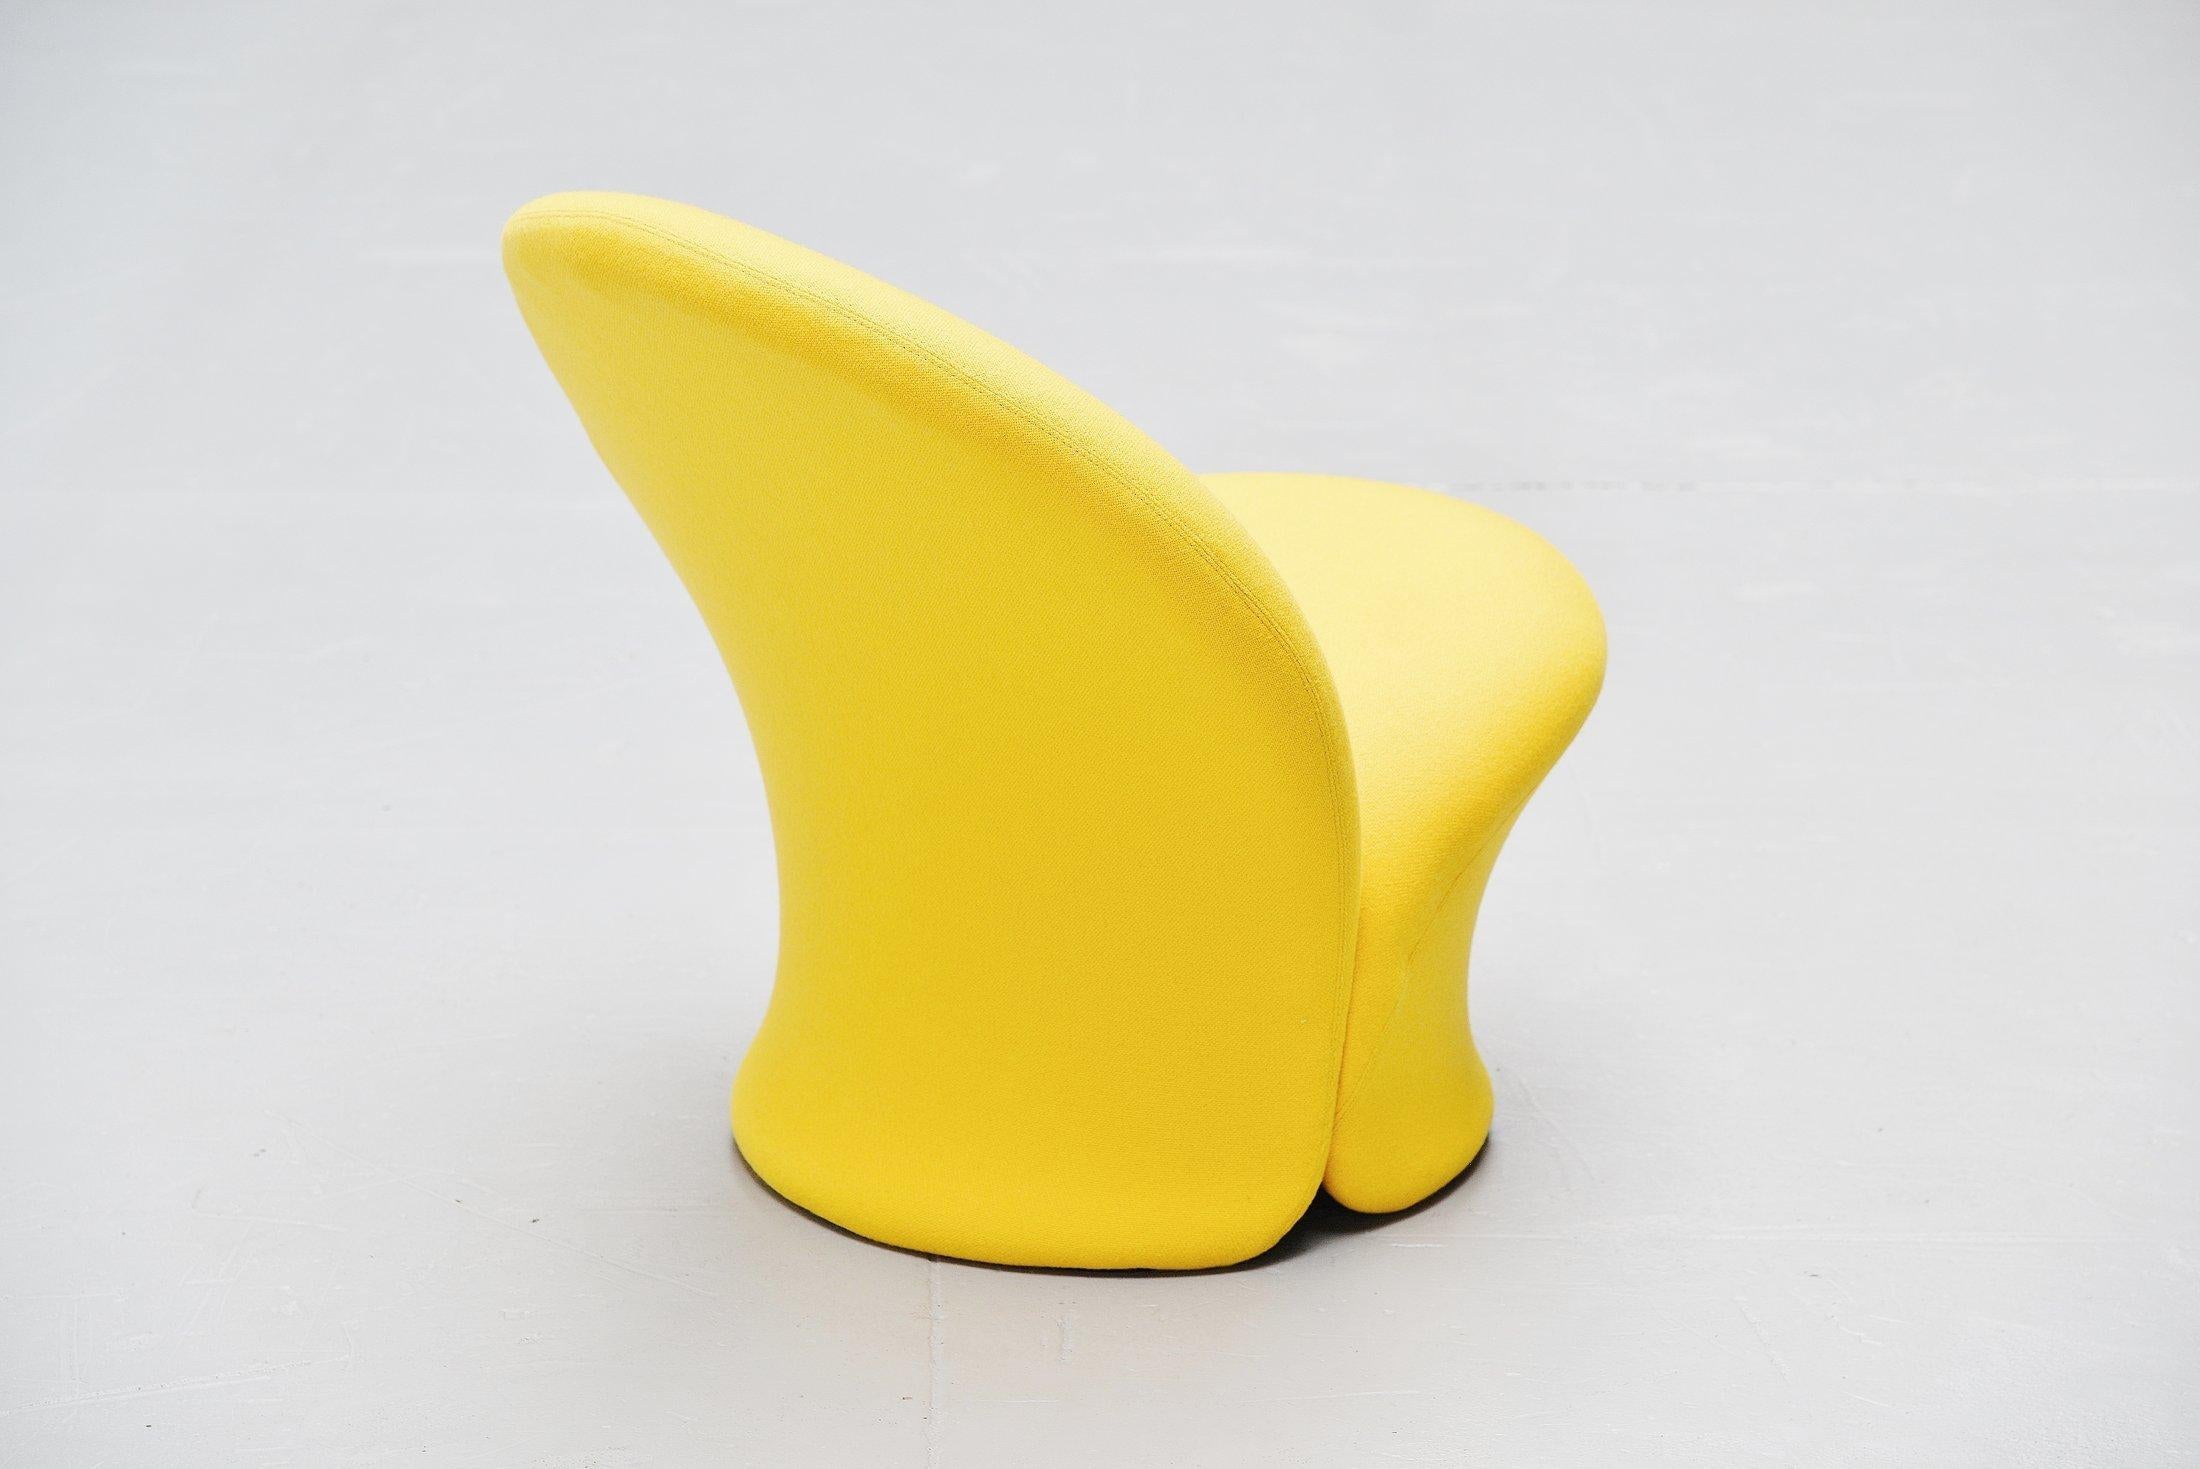 Super nice easy chair designed by Pierre Paulin (1927-2009) for Artifort in 1967. This rare chair model F572 was only produced for one year from 1967–1968 and is no longer in production now. Upholstered in yellow Tonus Kvadrat, original Artifort